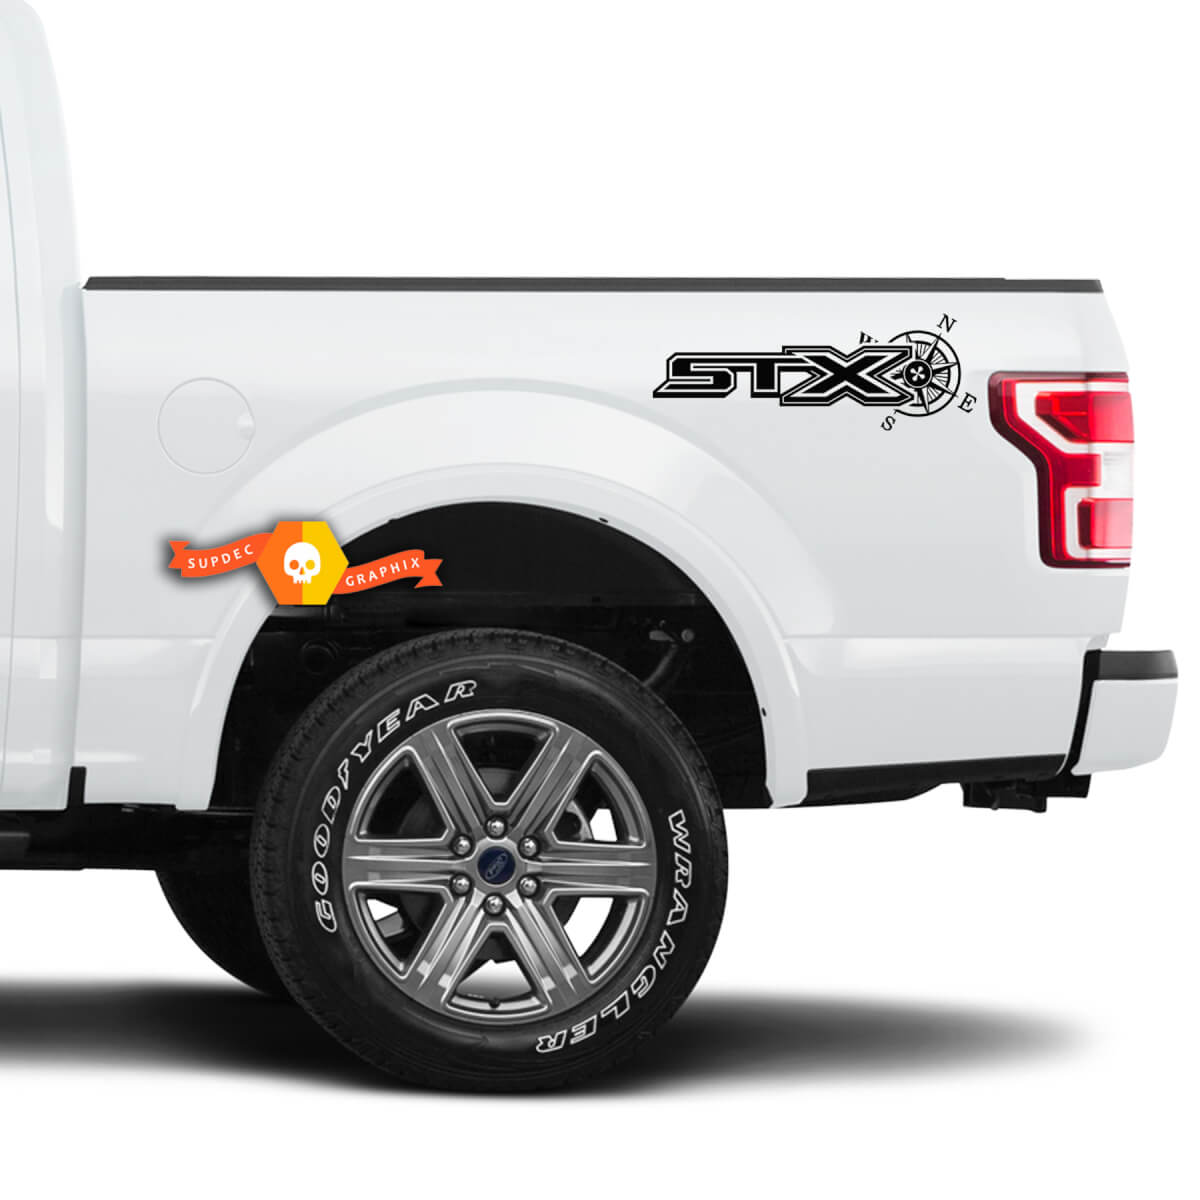 Pair STX Compass 4X4 Mountain Decals For Ford F150 F250 F350 Super Duty Truck Sticker Decal Vinyl